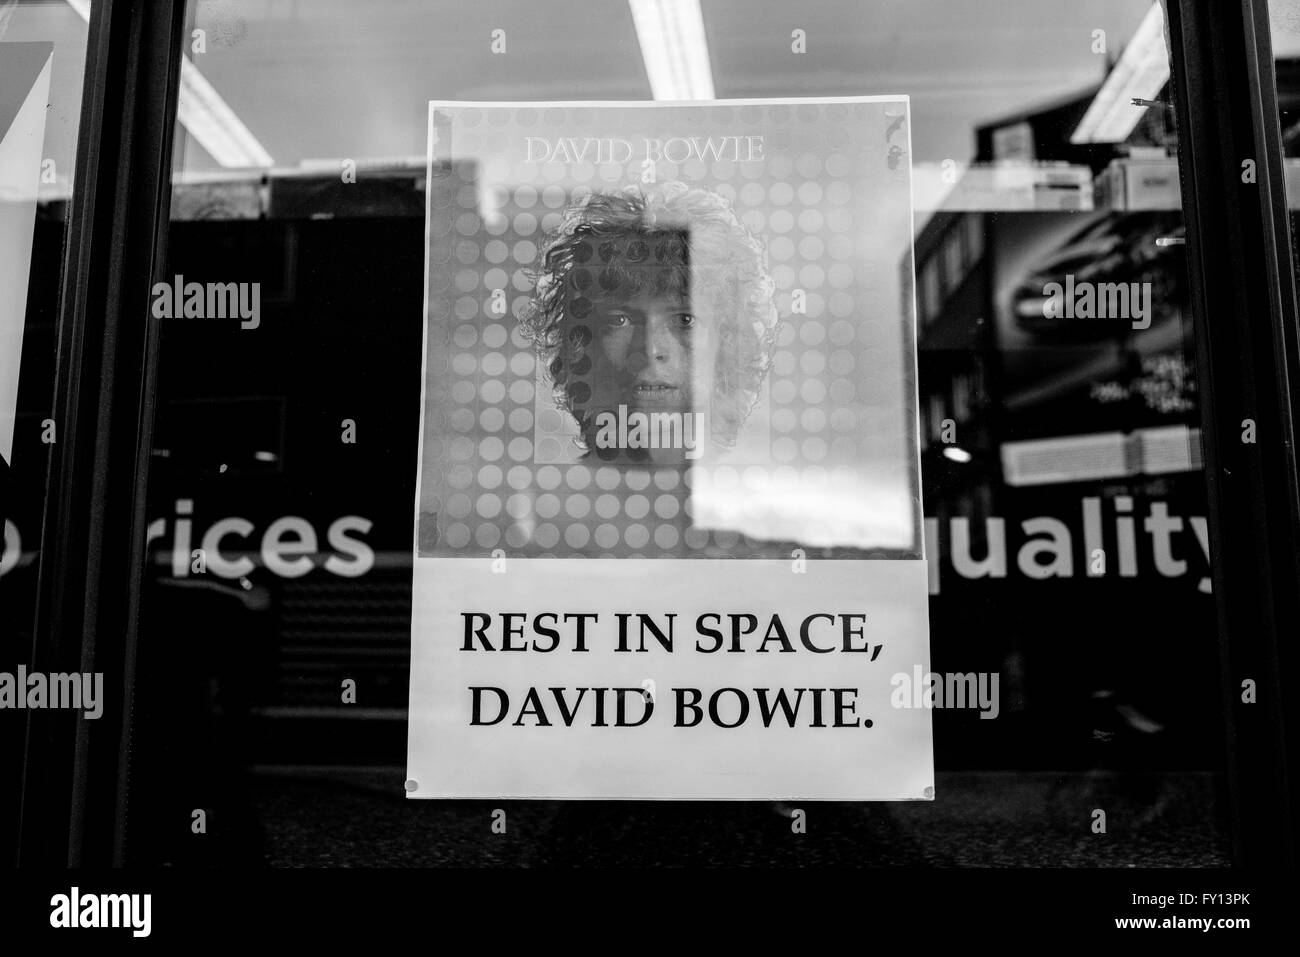 Poster tribute on a vinyl shop window with David Bowie portrait and the words 'Rest in space, David Bowie'. Stock Photo